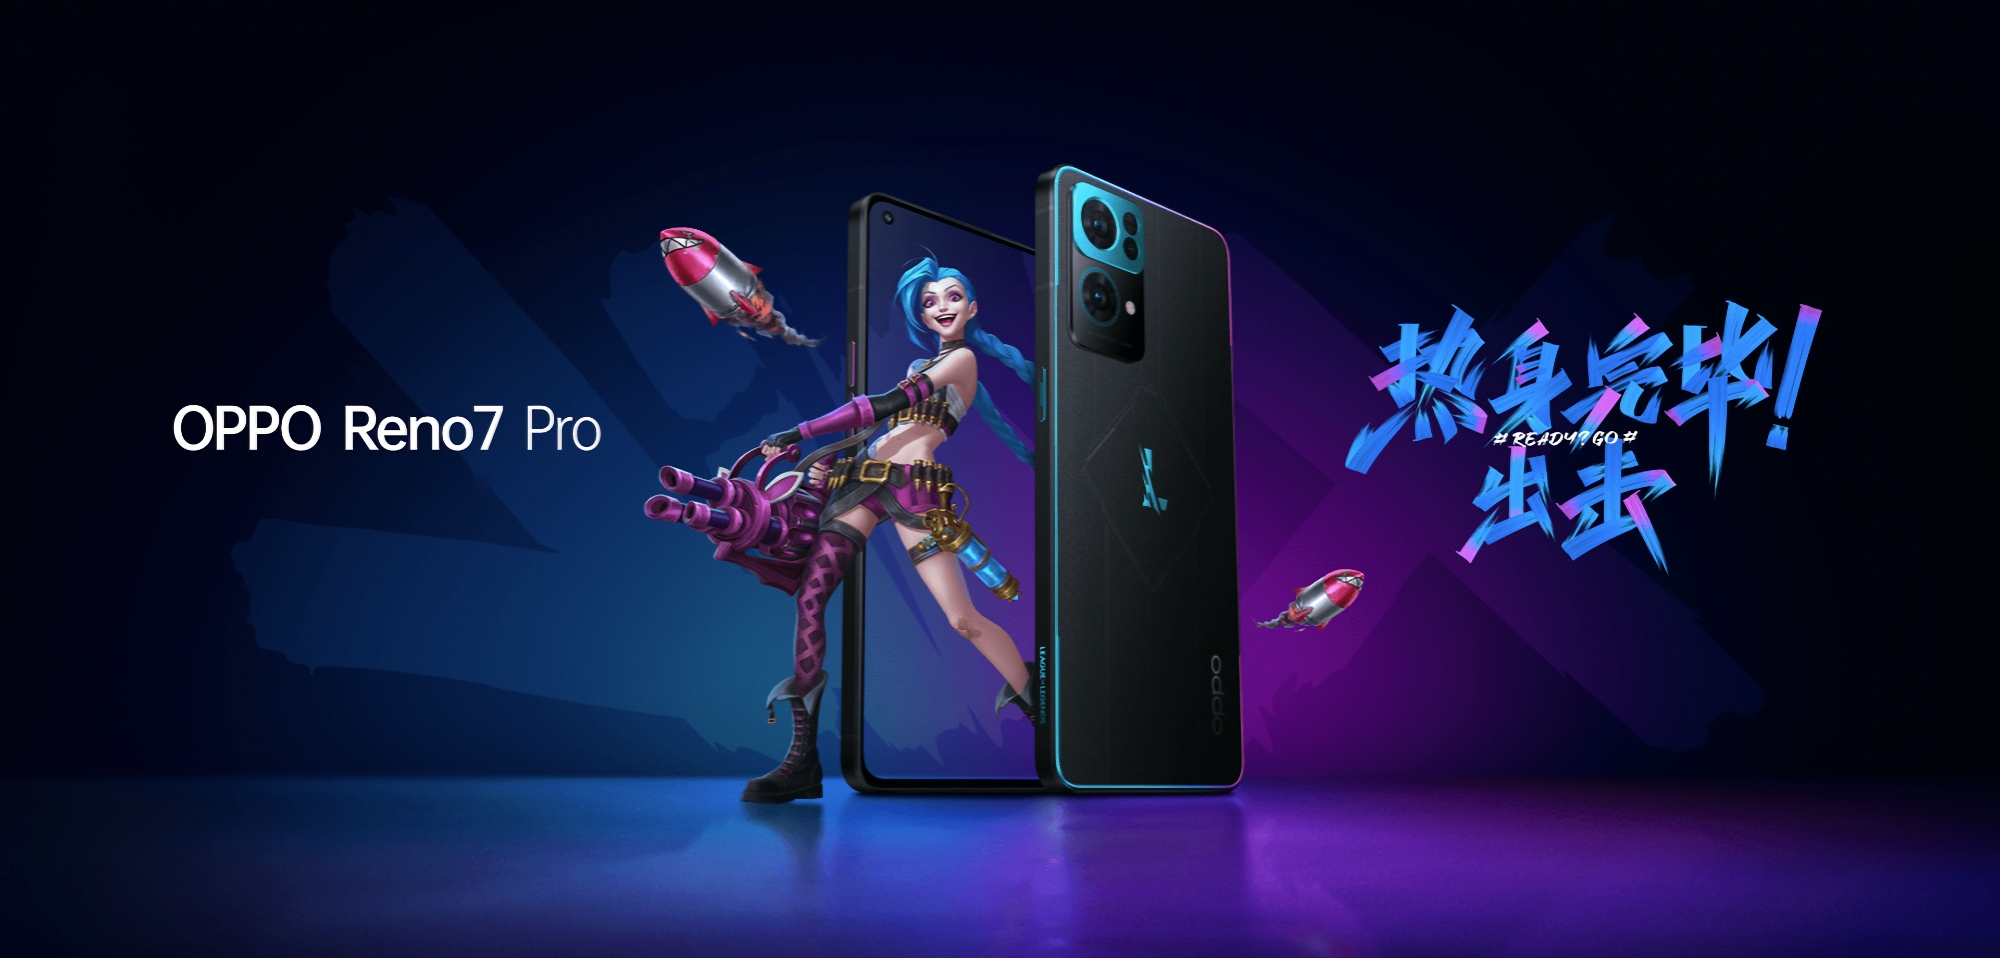 For League of Legends fans: OPPO unveils a special edition of the Reno 7 Pro smartphone